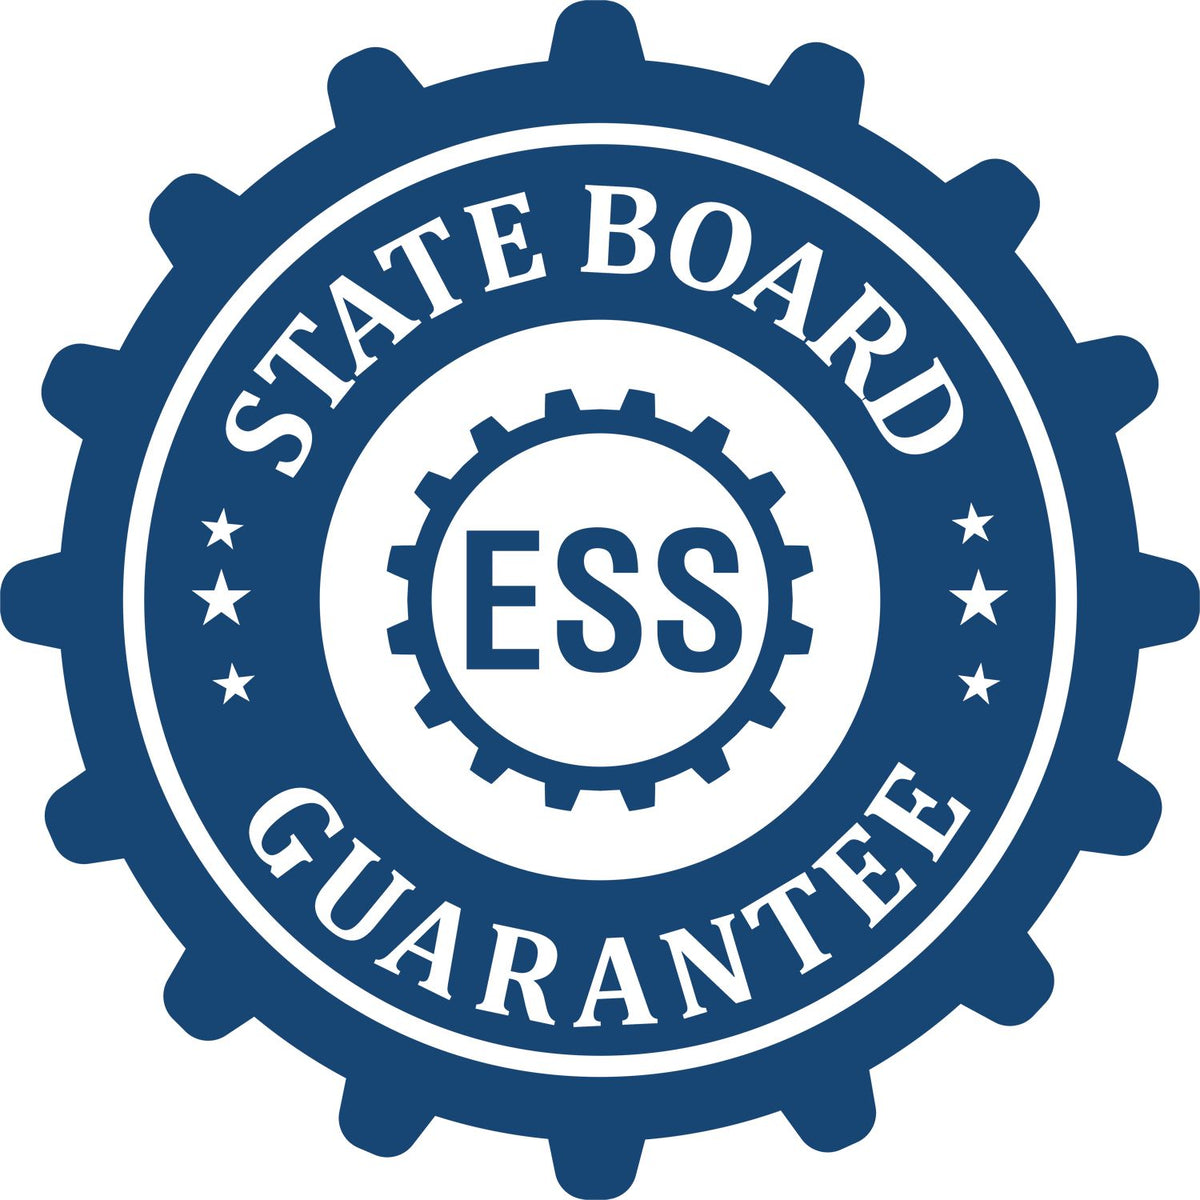 An emblem in a gear shape illustrating a state board guarantee for the Hybrid Utah Land Surveyor Seal